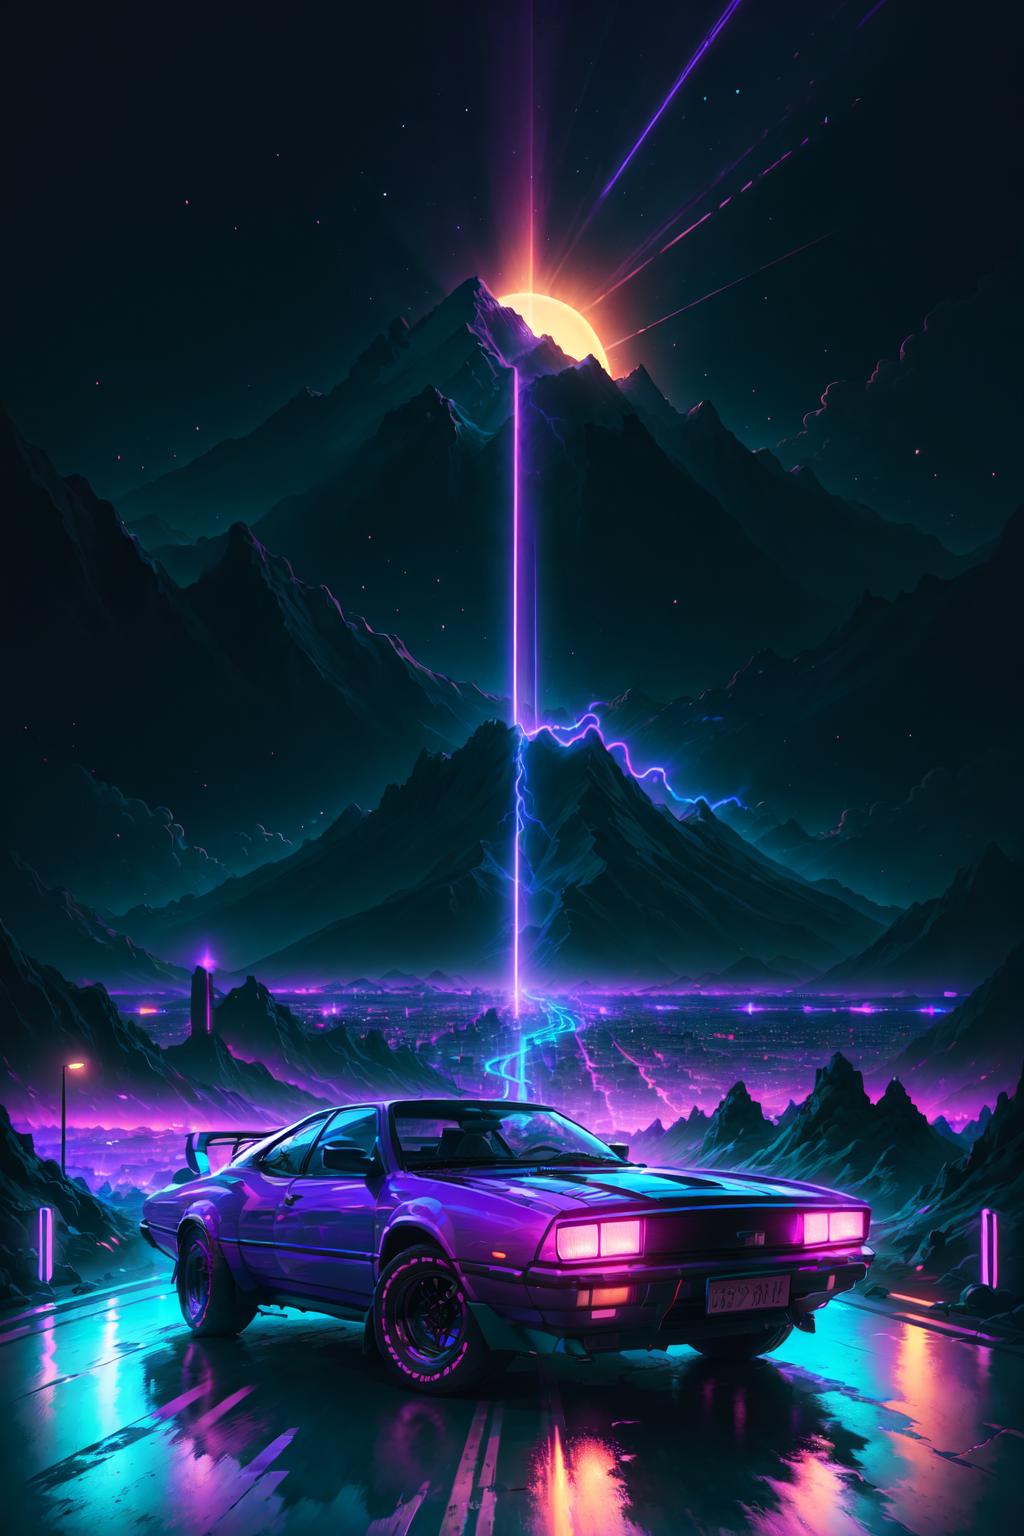 A purple sports car drives through a mountain range at night with a glowing beam behind it.